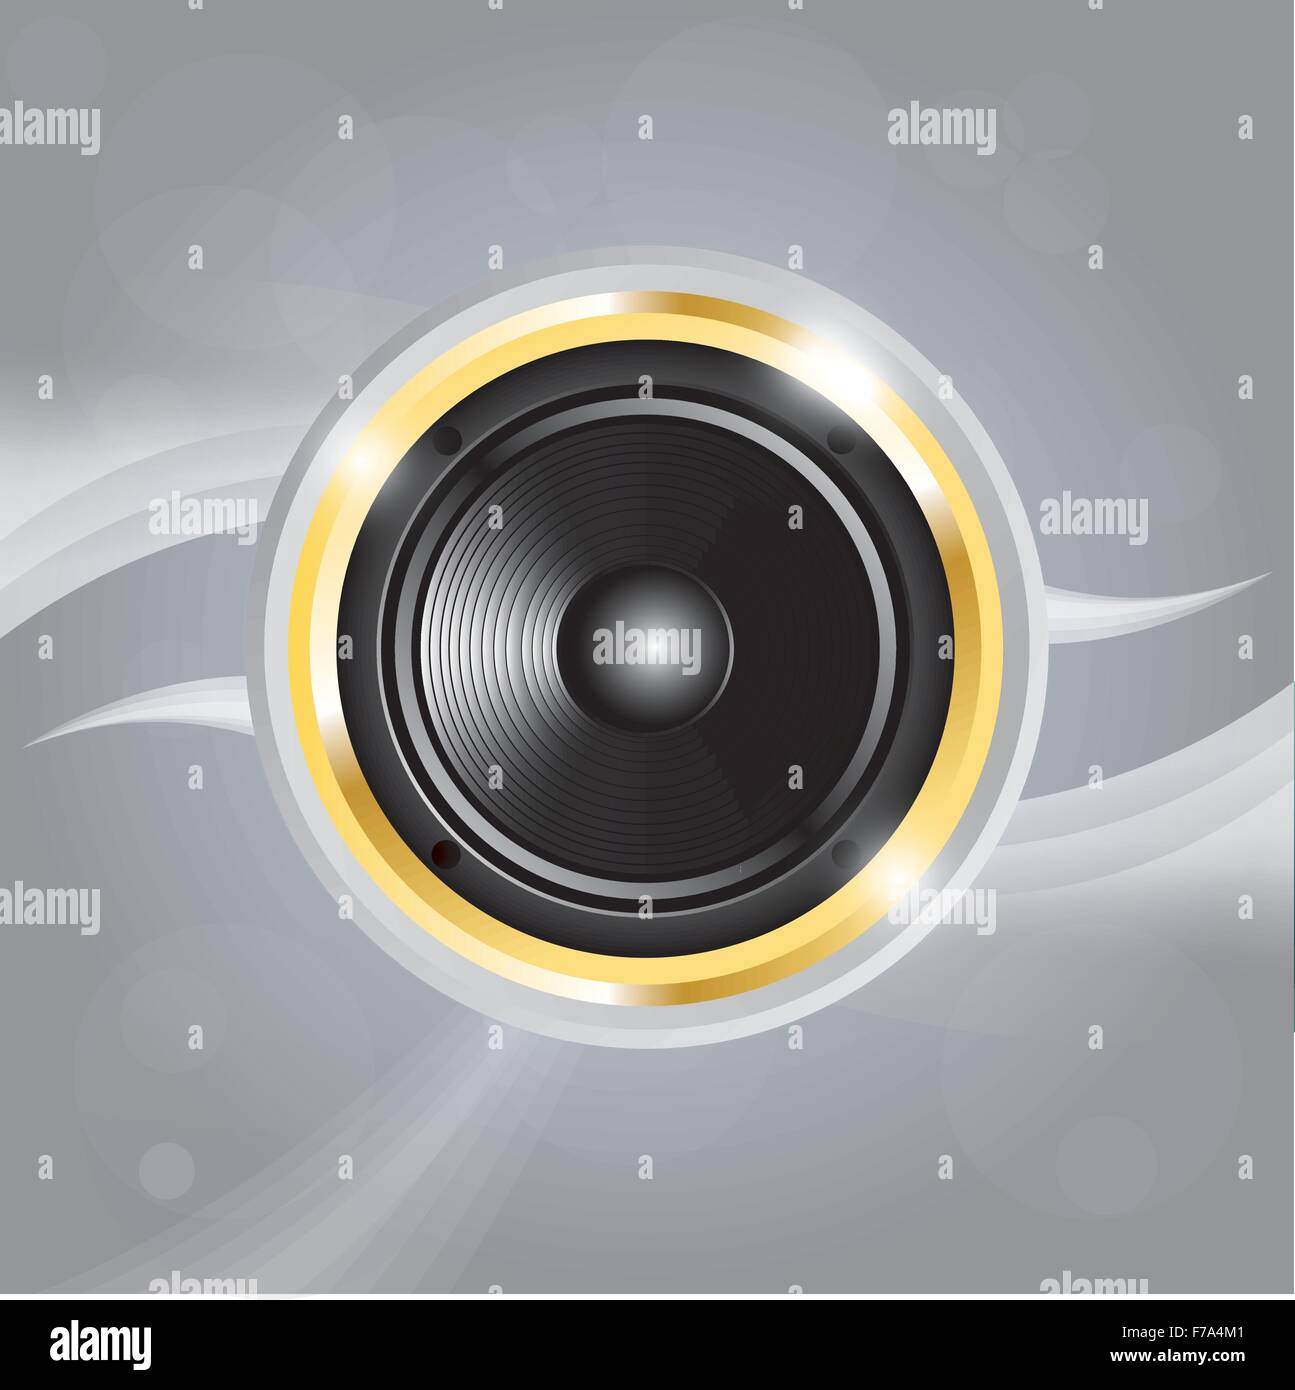 Music speaker of gold color on gray background with lines. EPS10 Stock Vector